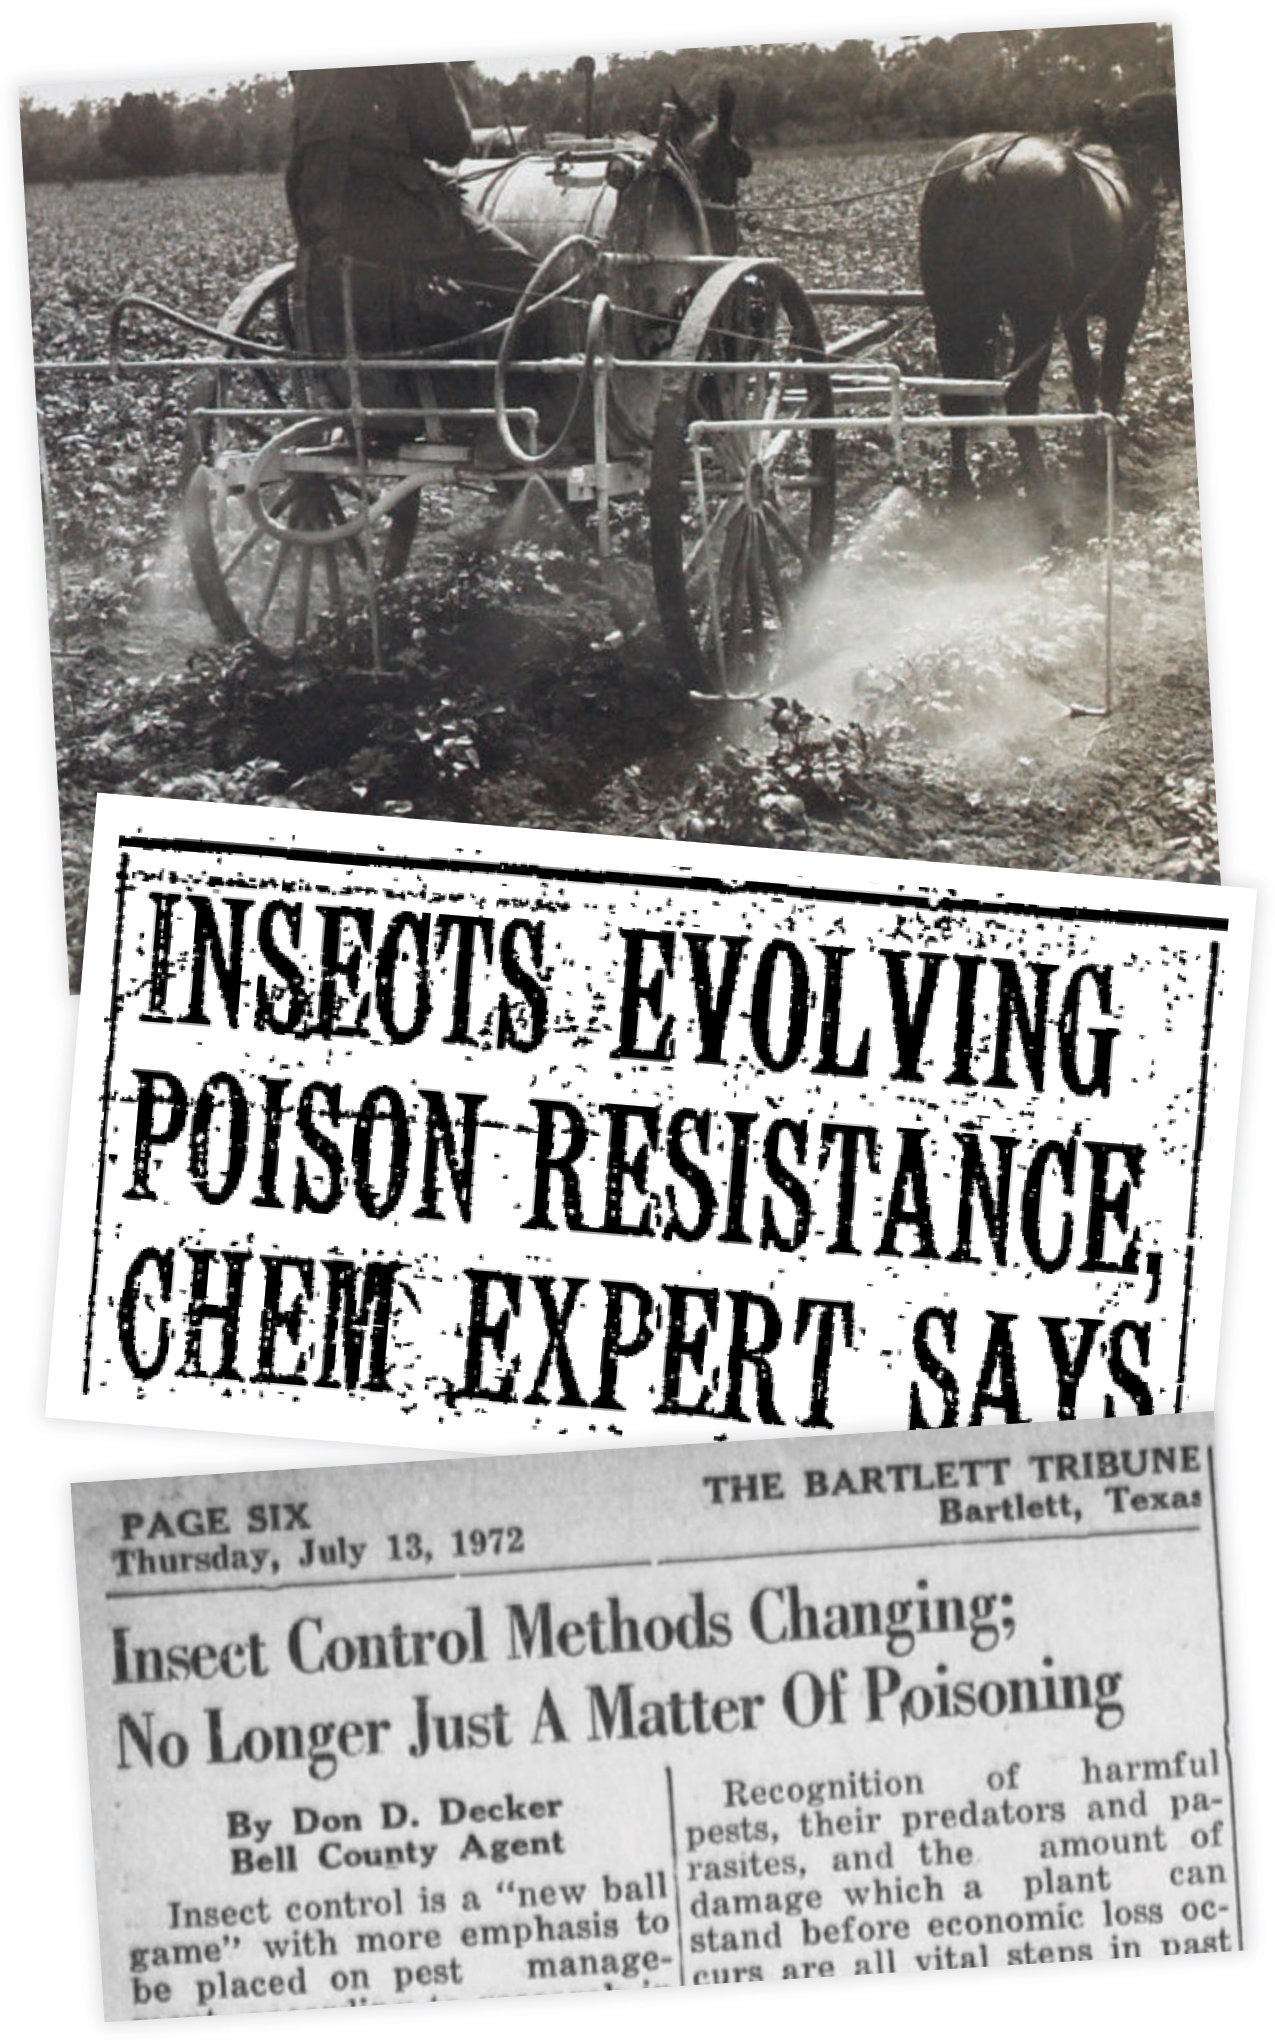 1930s newspaper about pesticides